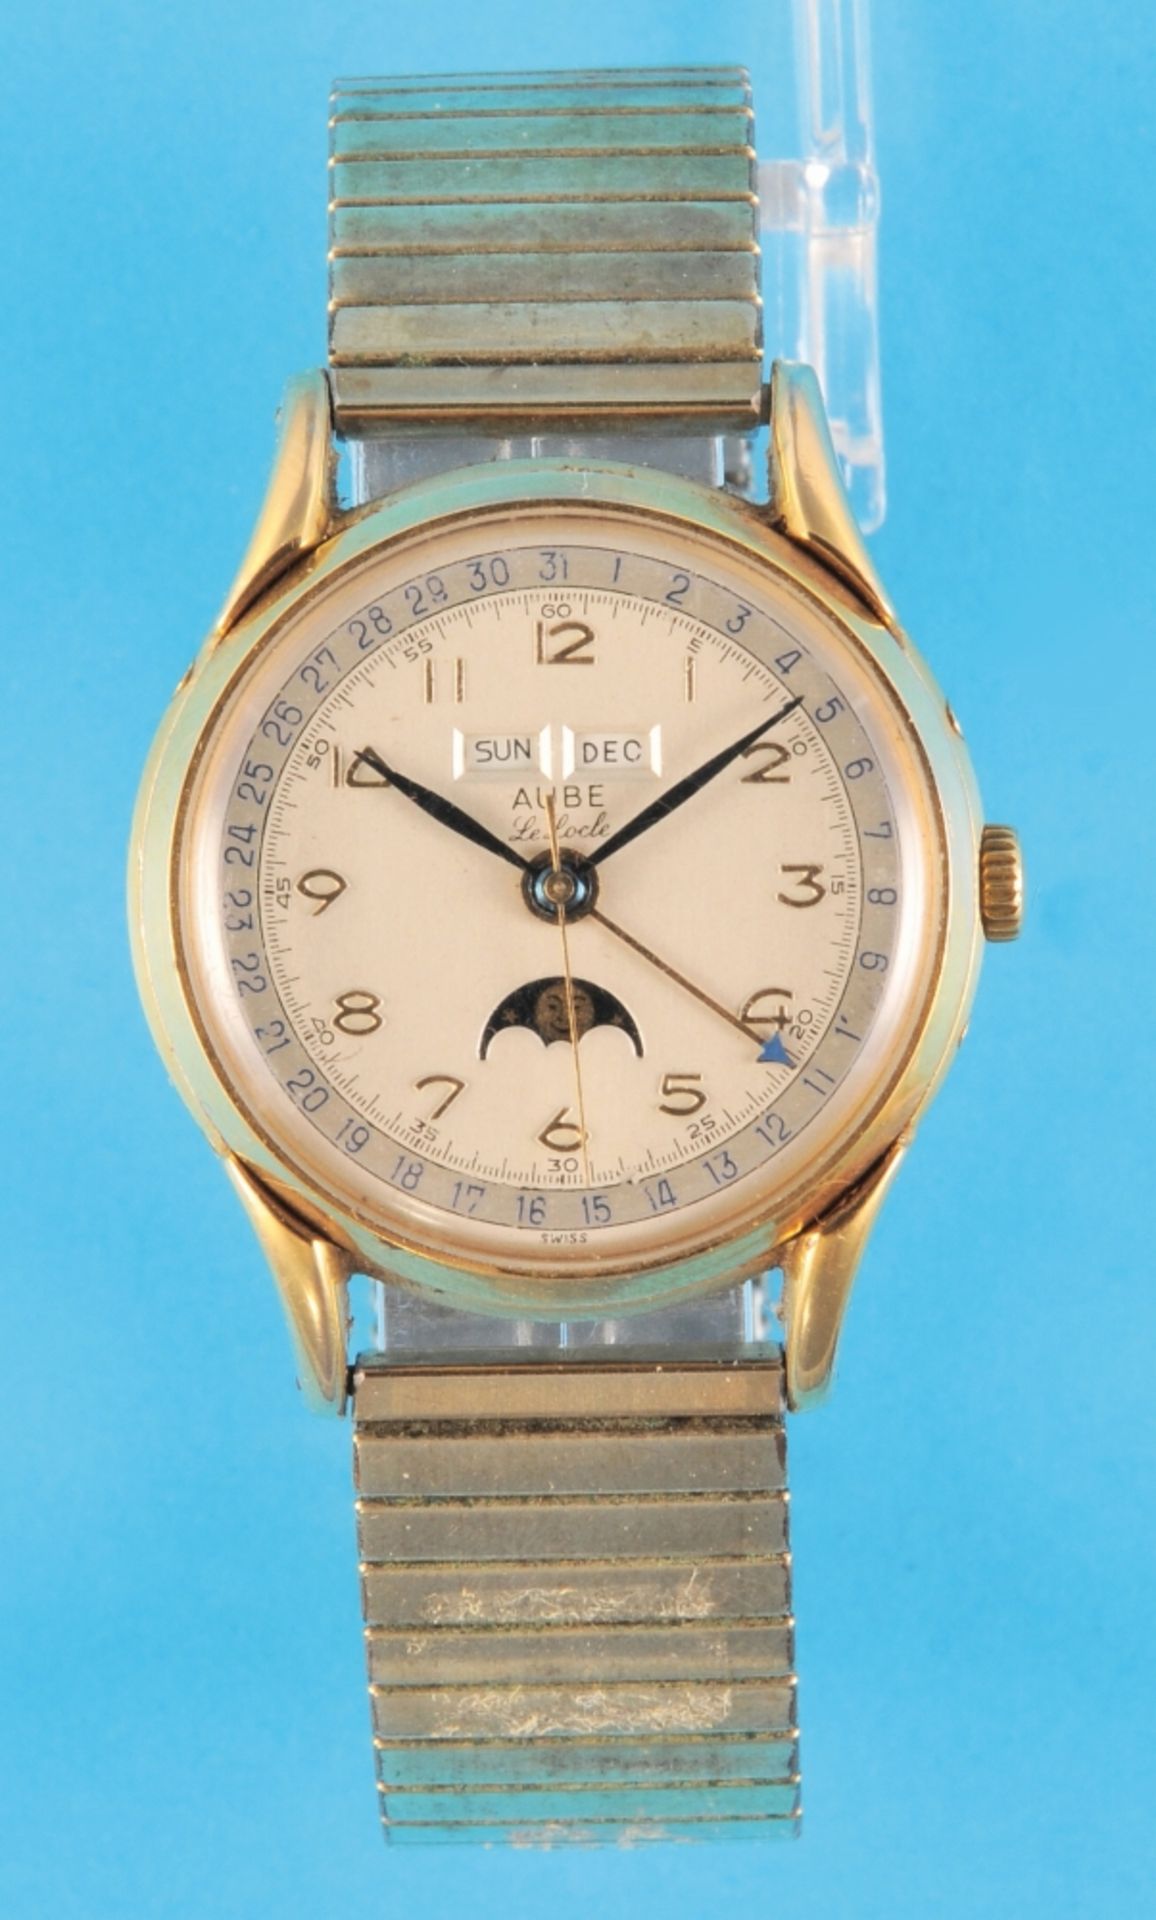 Aube Le Locle, gold-plated wristwatch with moon phase calendar, reference 1201, cal. ETA 1100, circa